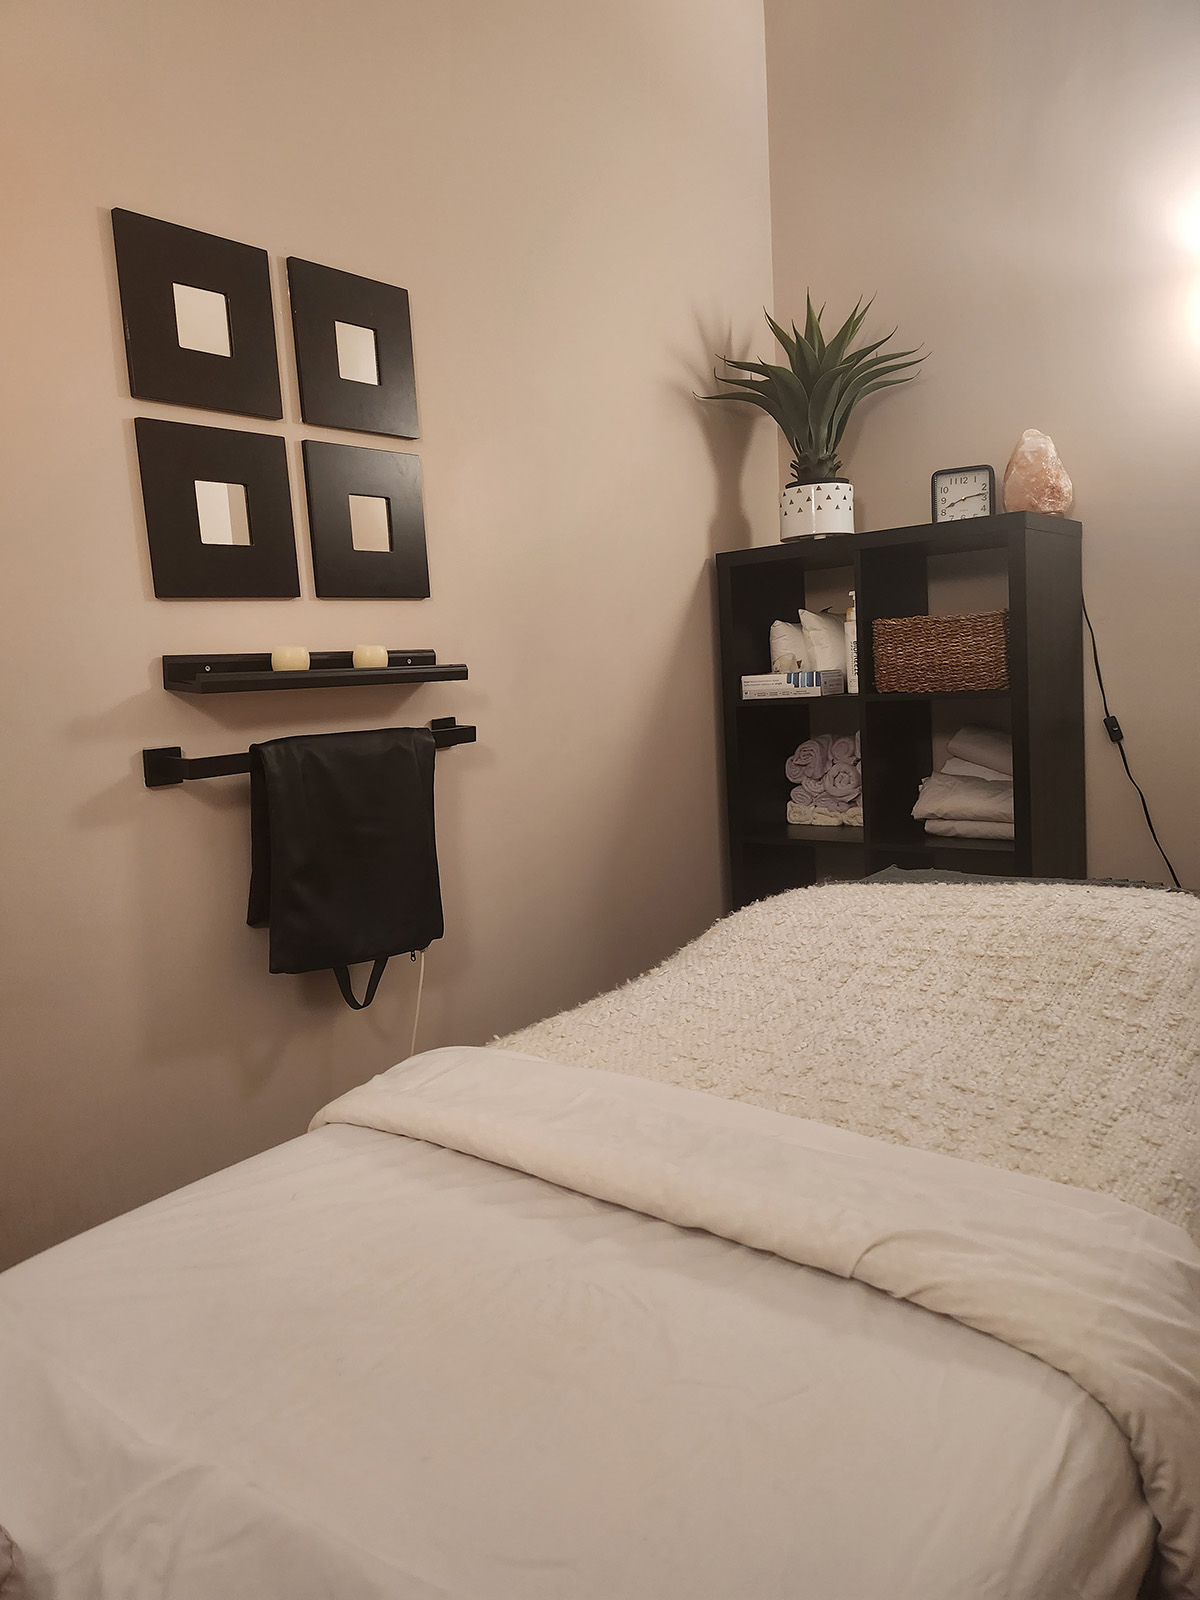 A cozy massage treatment room scene featuring a neatly made bed with white linens, a bookshelf with various items, a massage therapy salt lamp, and minimalist black square wall decor.